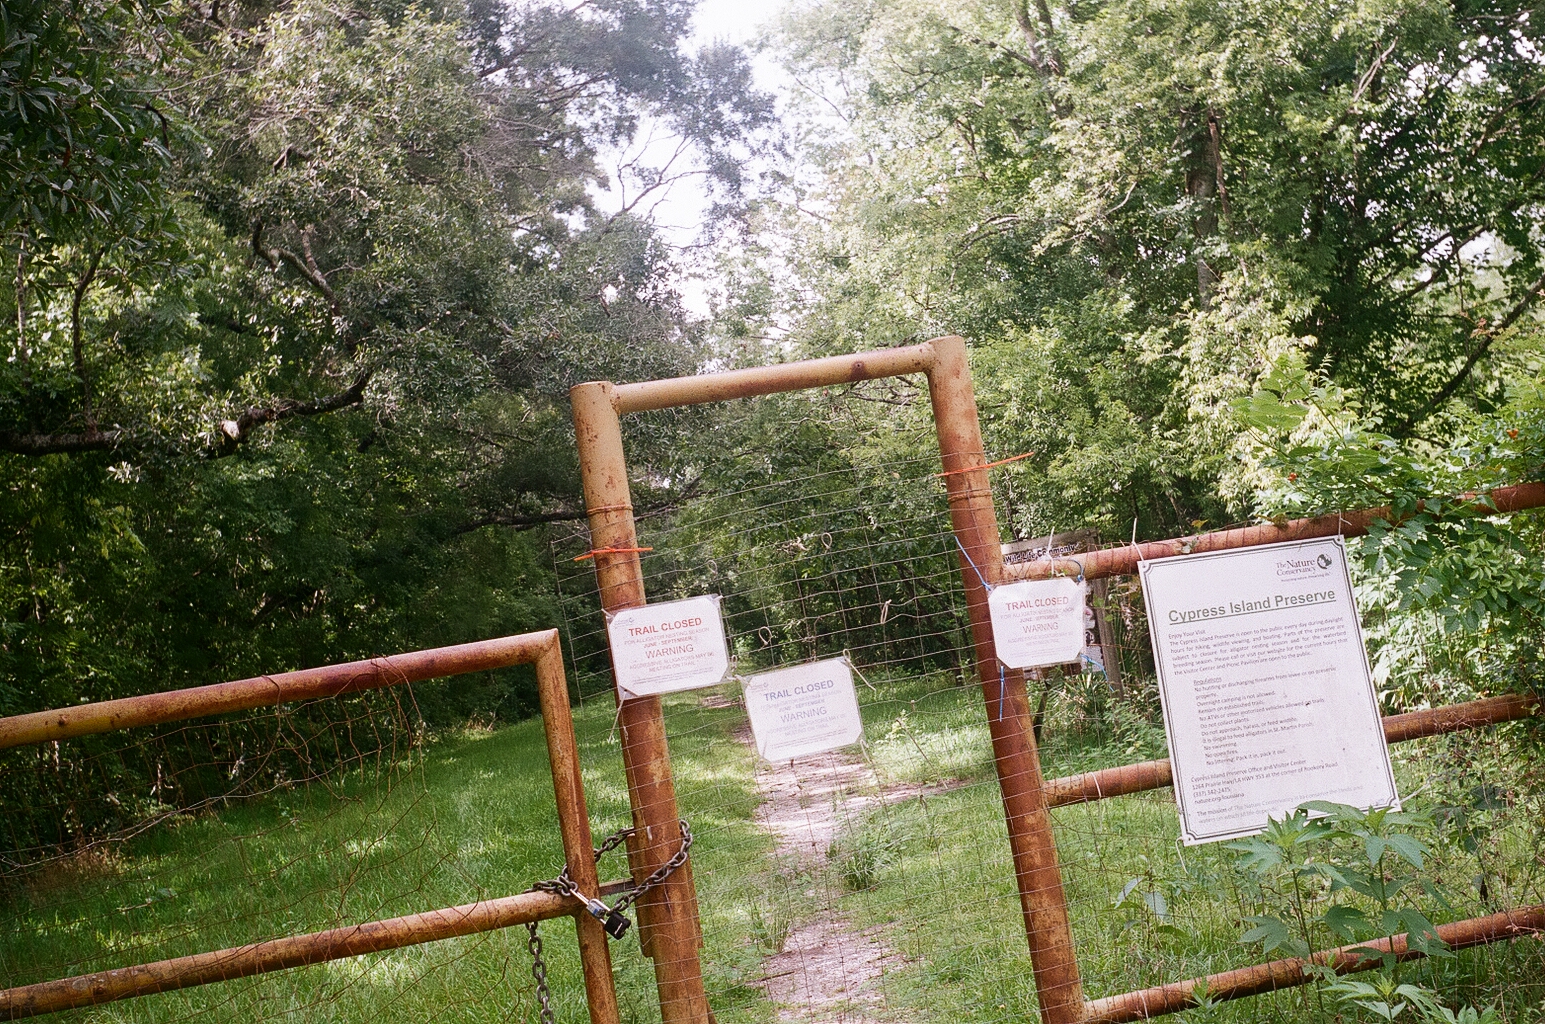 The gate to a trail closed for alligators. Lots of signs are ziptied to the gate saying 'Trail Closed: Warning.'